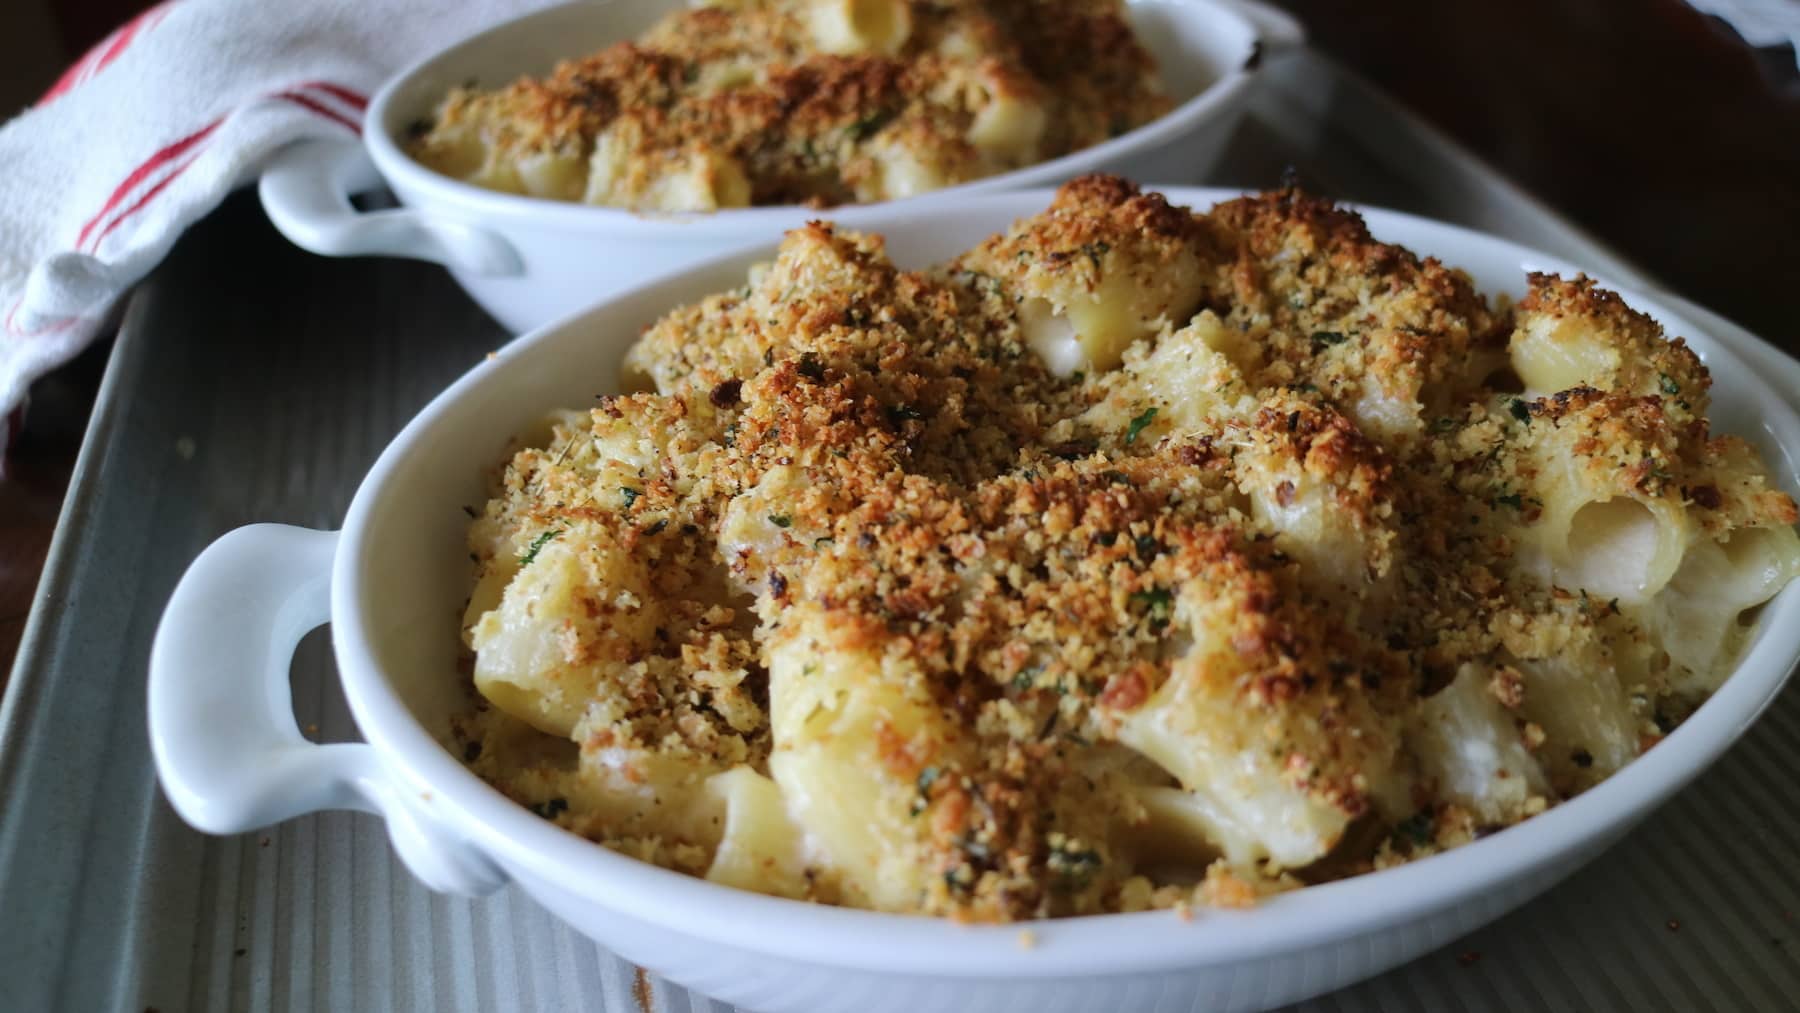 Baked Mac & Cheese with Brown Butter Pangrattato